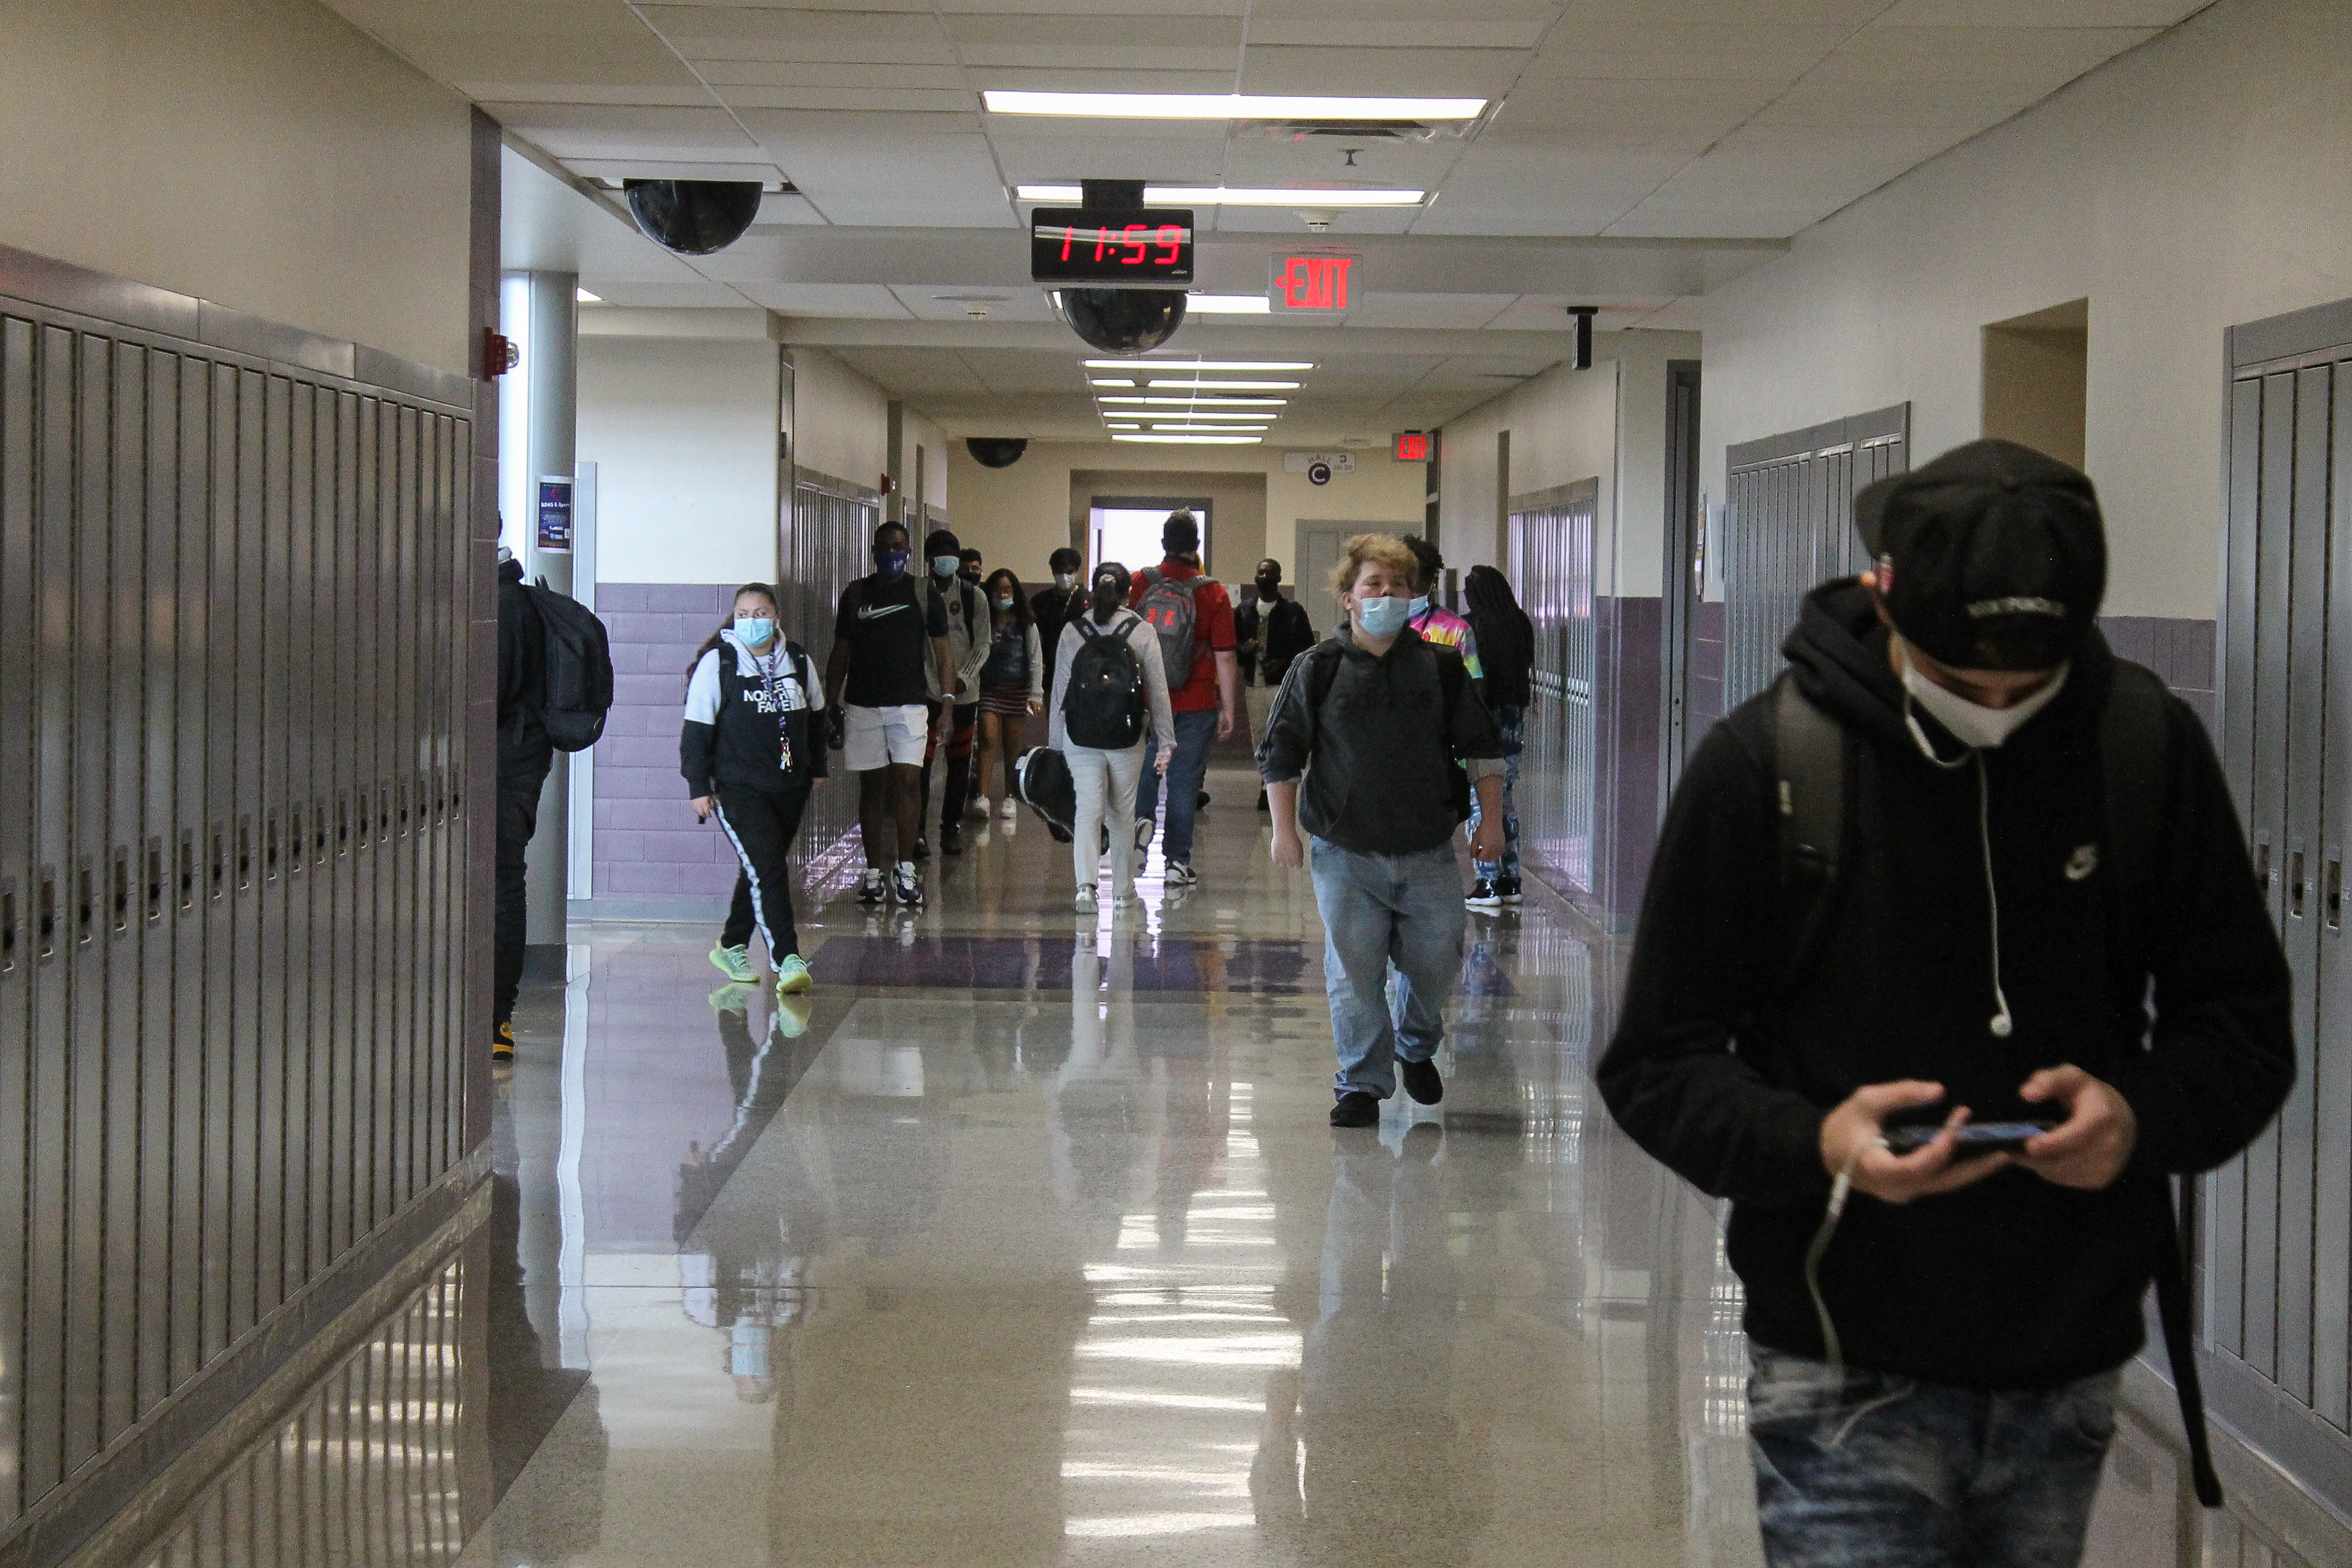 Scenes from Ben Davis High School in Indianapolis, Ind. on Friday, April 9, 2021. This was the first week back full-time since the beginning of the pandemic for Wayne Township Schools.